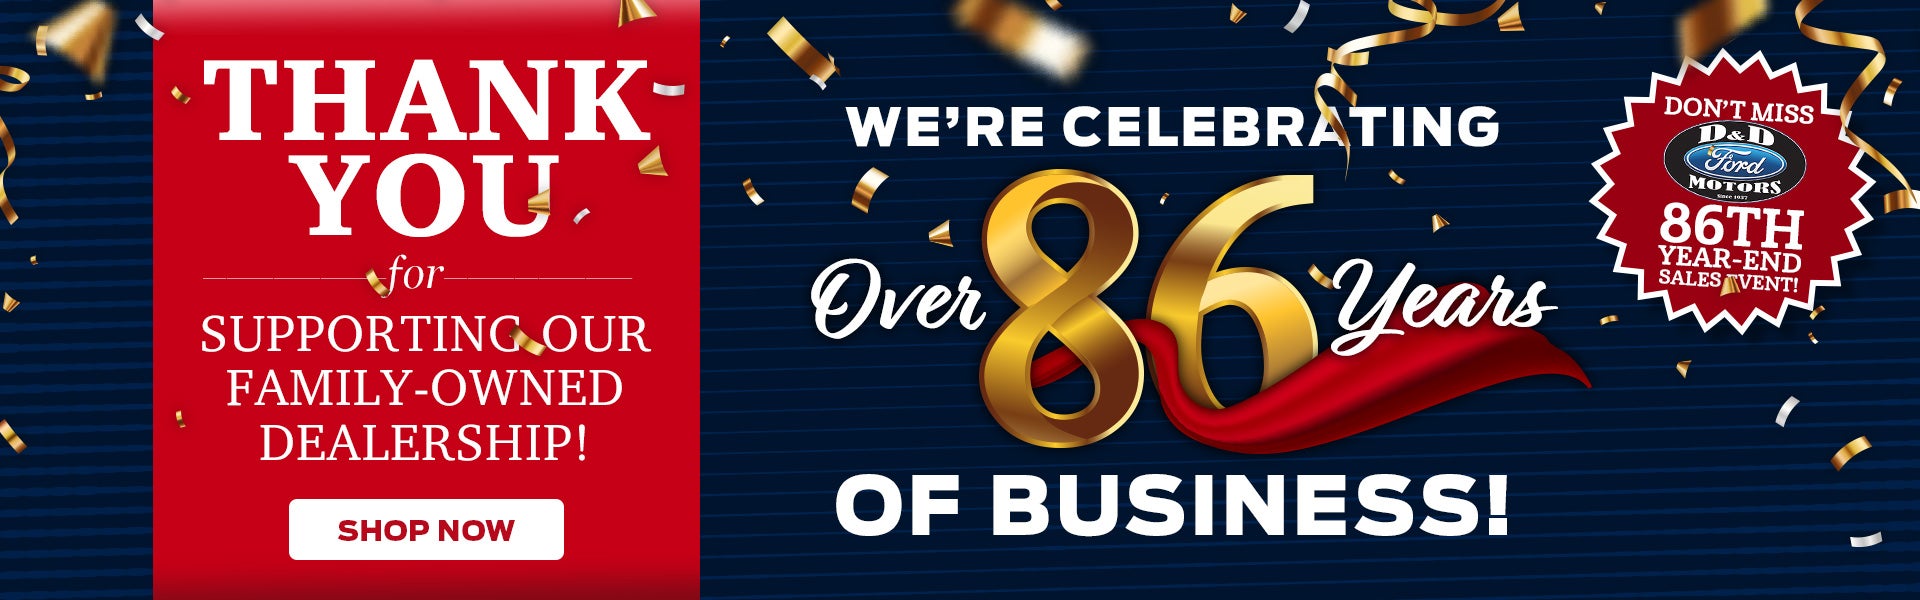 D & D Ford Celebrating Over 86 Years of Business in Greer SC